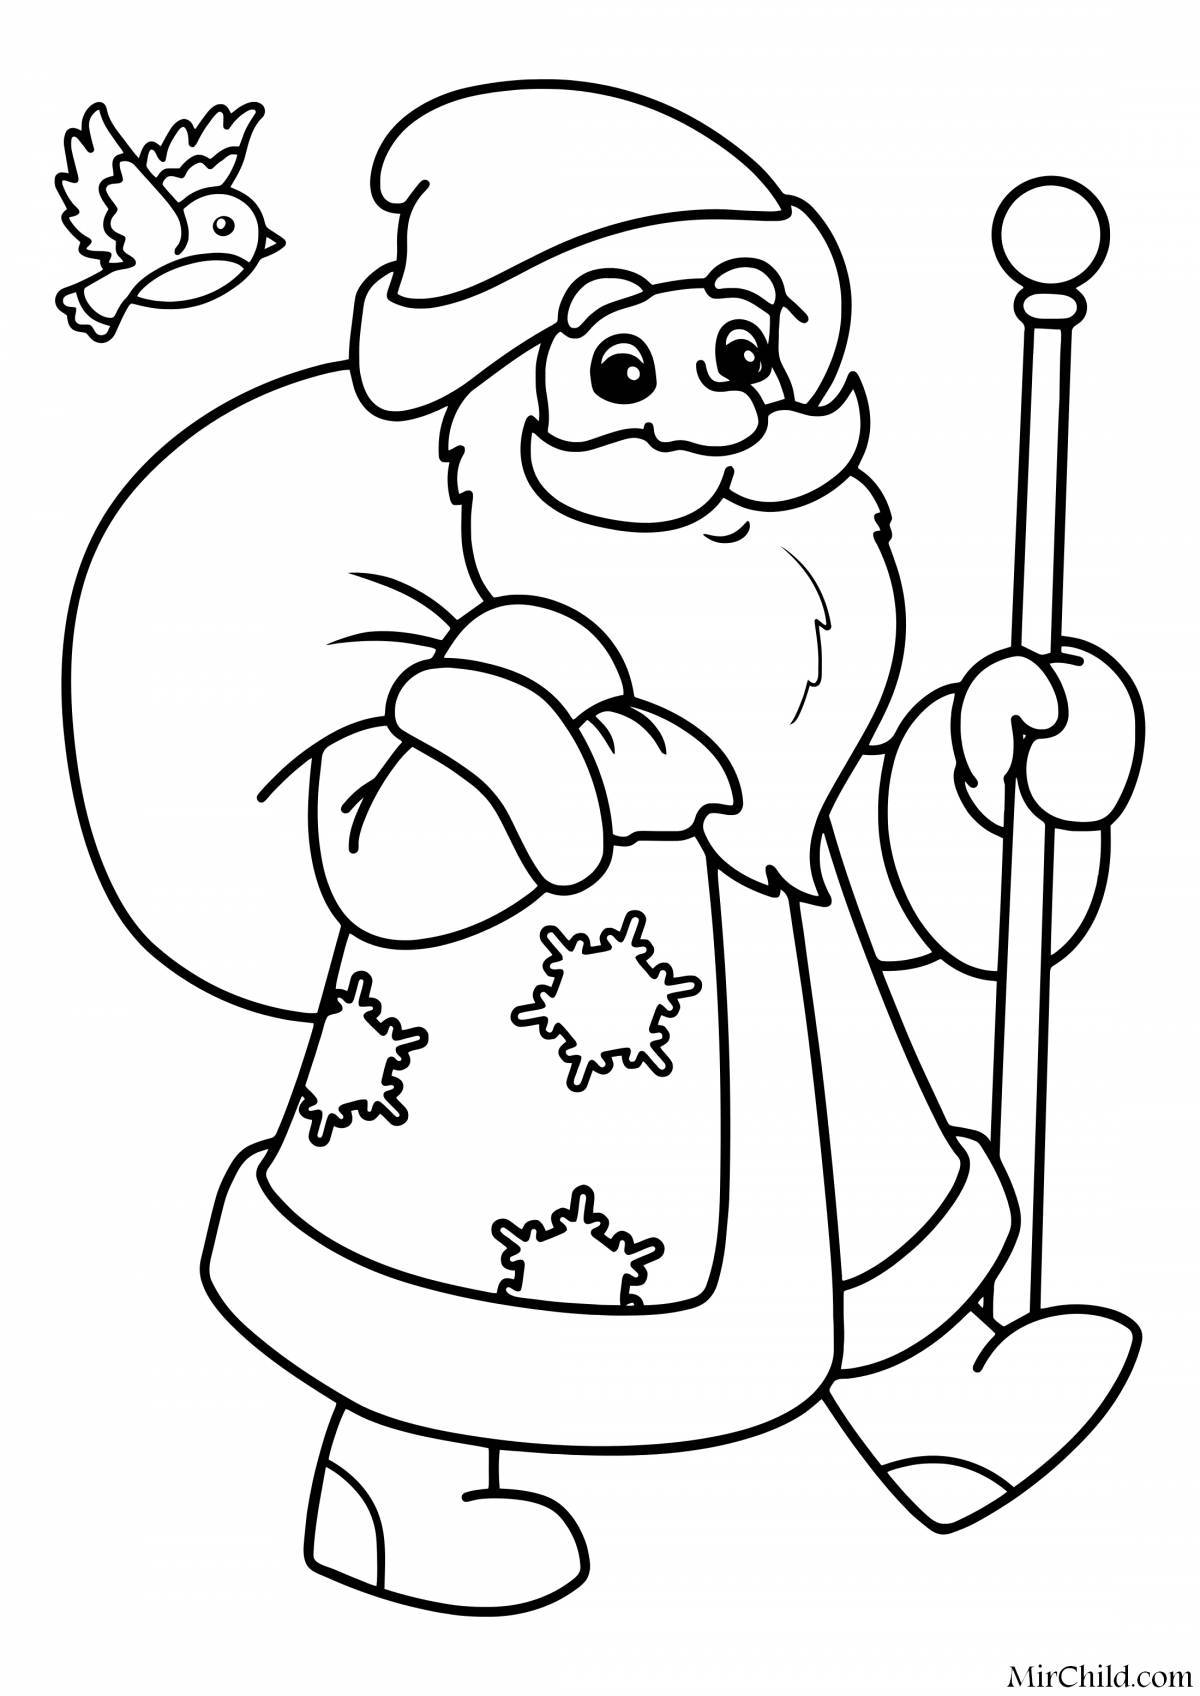 Santa Claus for children 3 4 years old #6